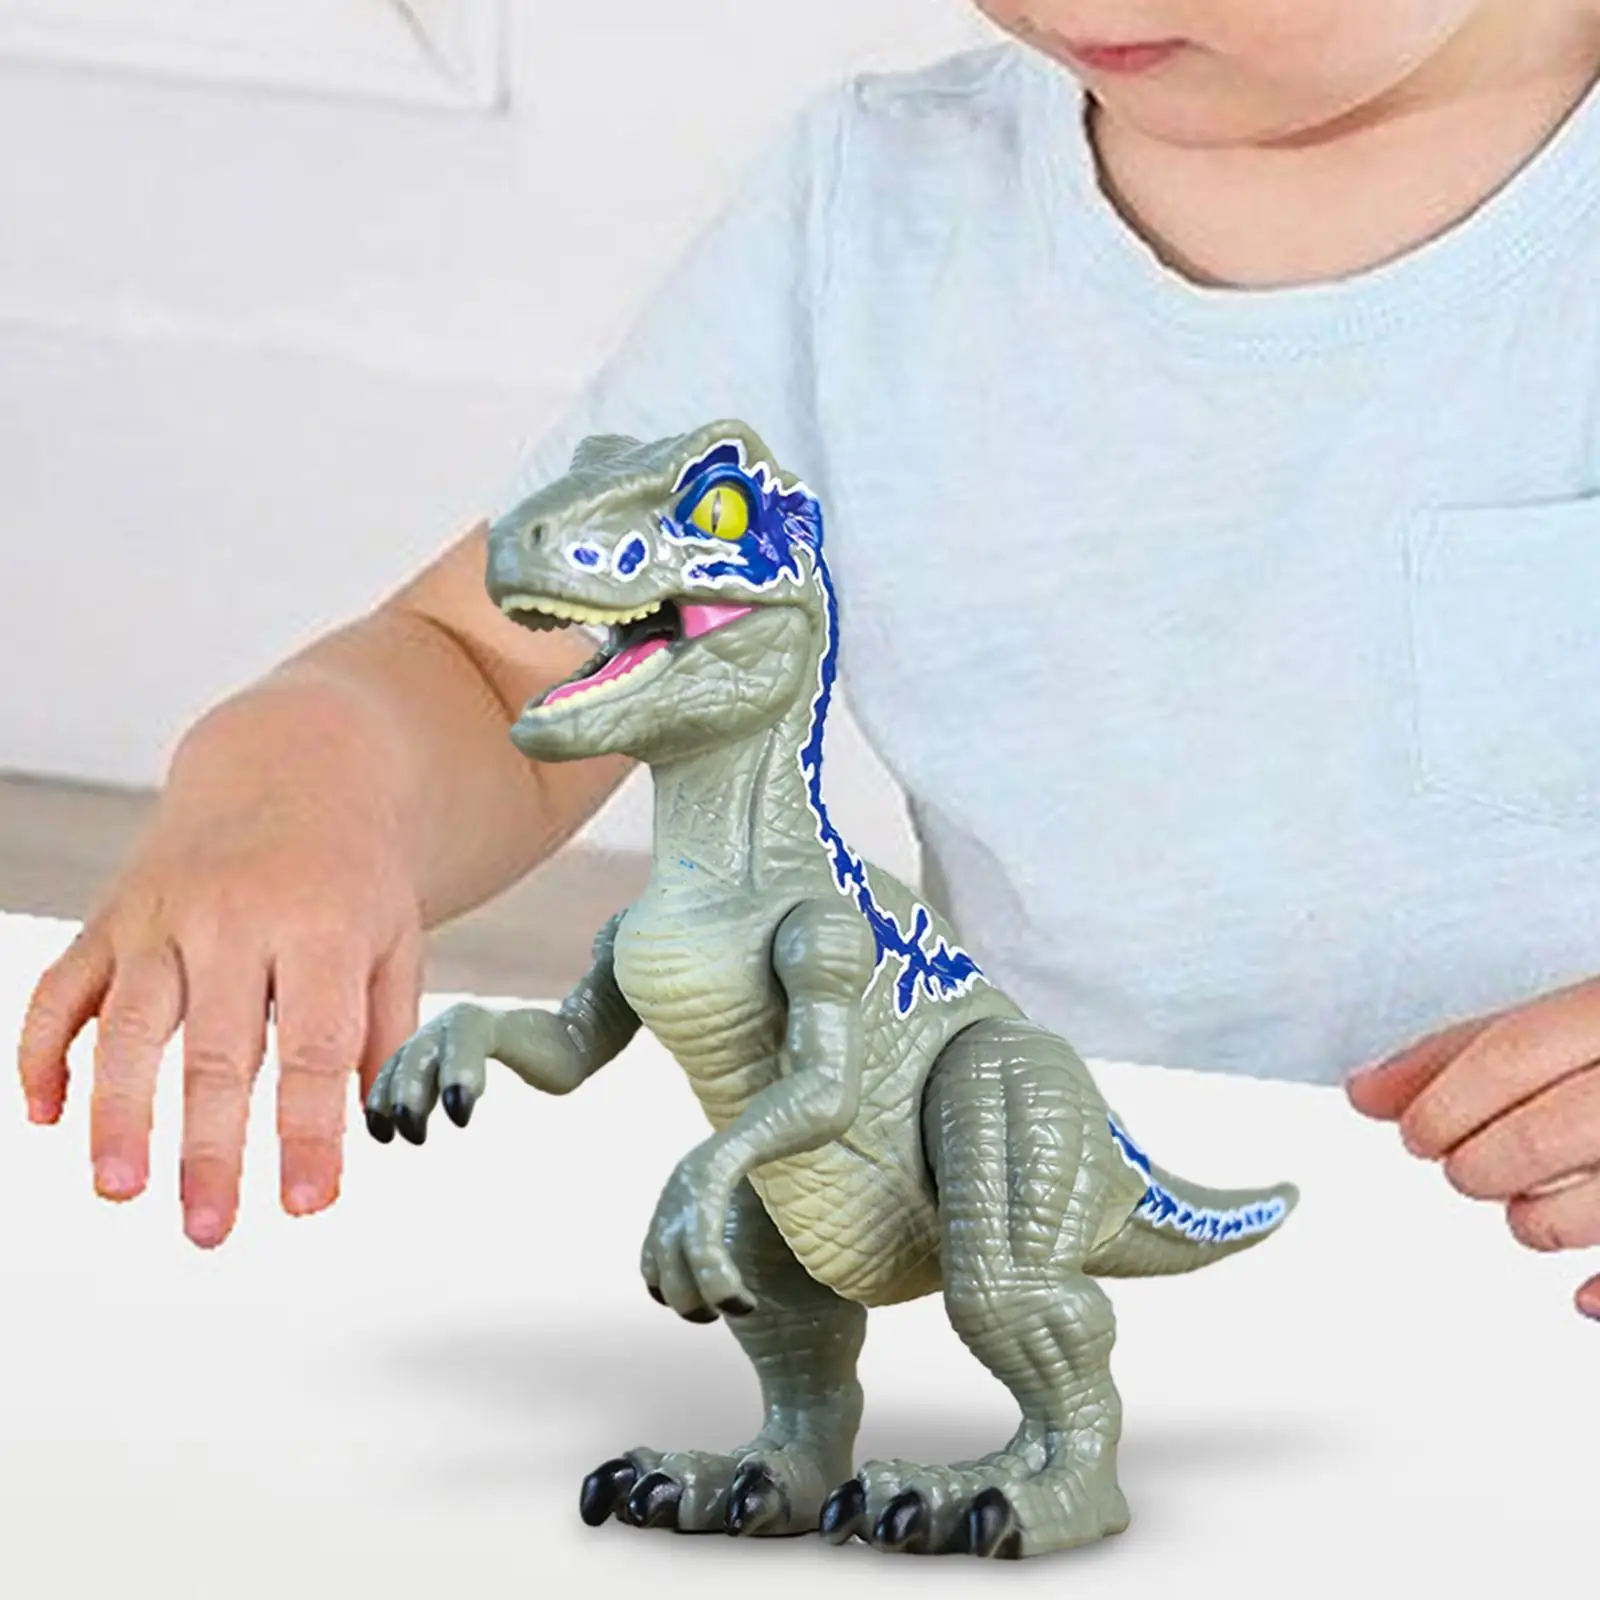 Dinosaur Action Figure Toy Movable Joints Ornament, Collectibles Animal Figurine Model Simulated Dinosaur Toy for Gift Cars